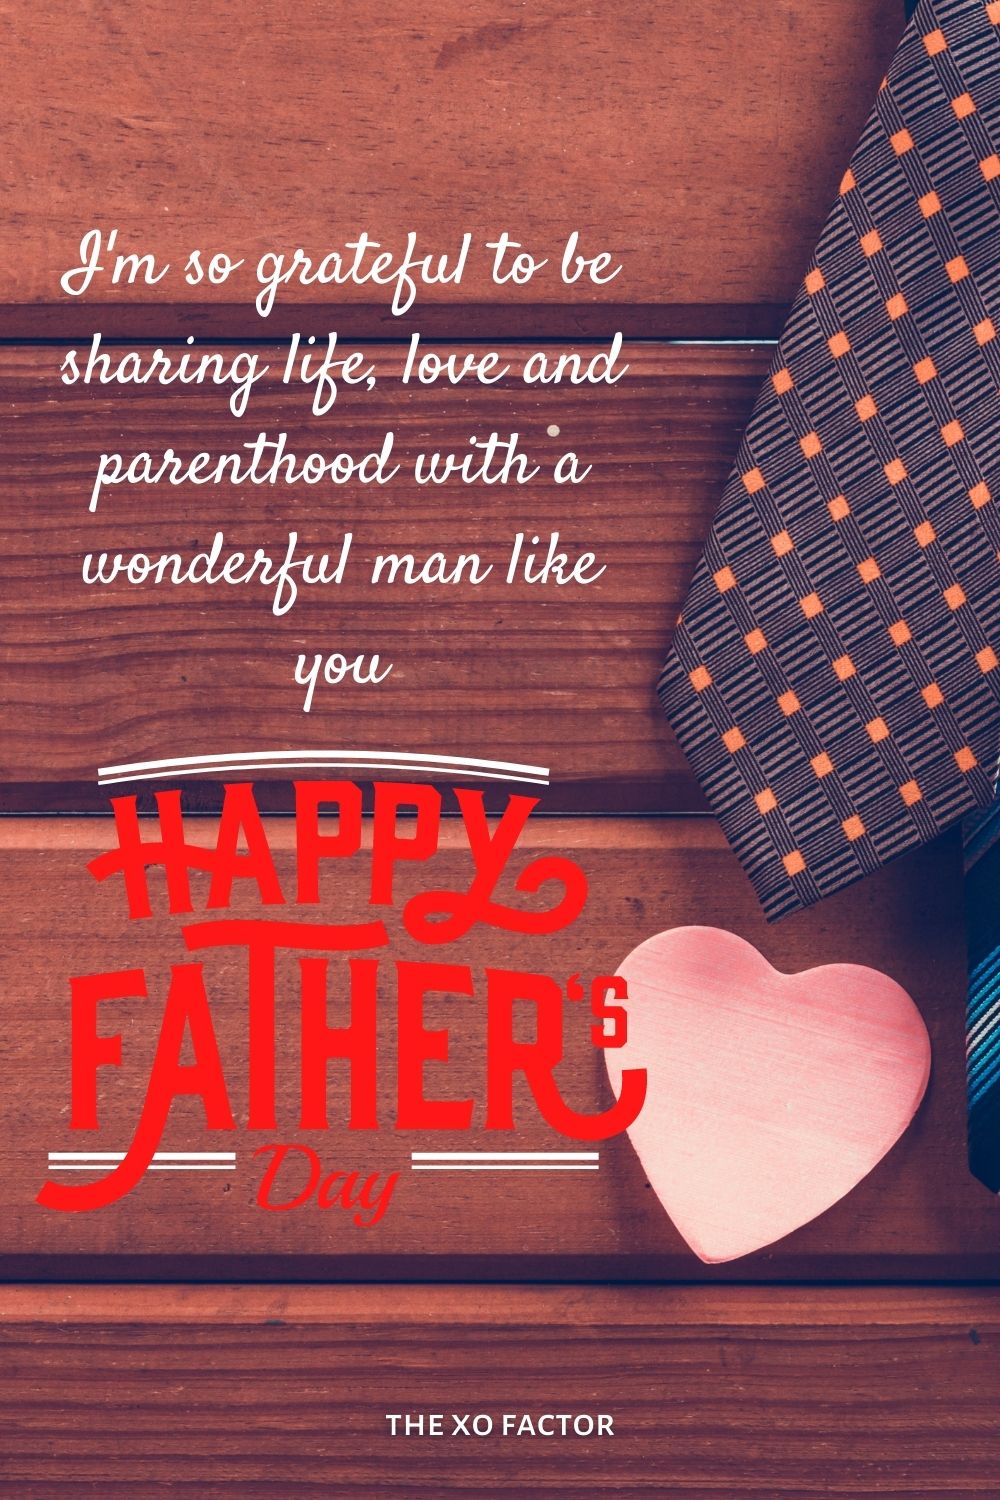 I'm so grateful to be sharing life, love and parenthood with a wonderful man like you, Happy Father's Day my love